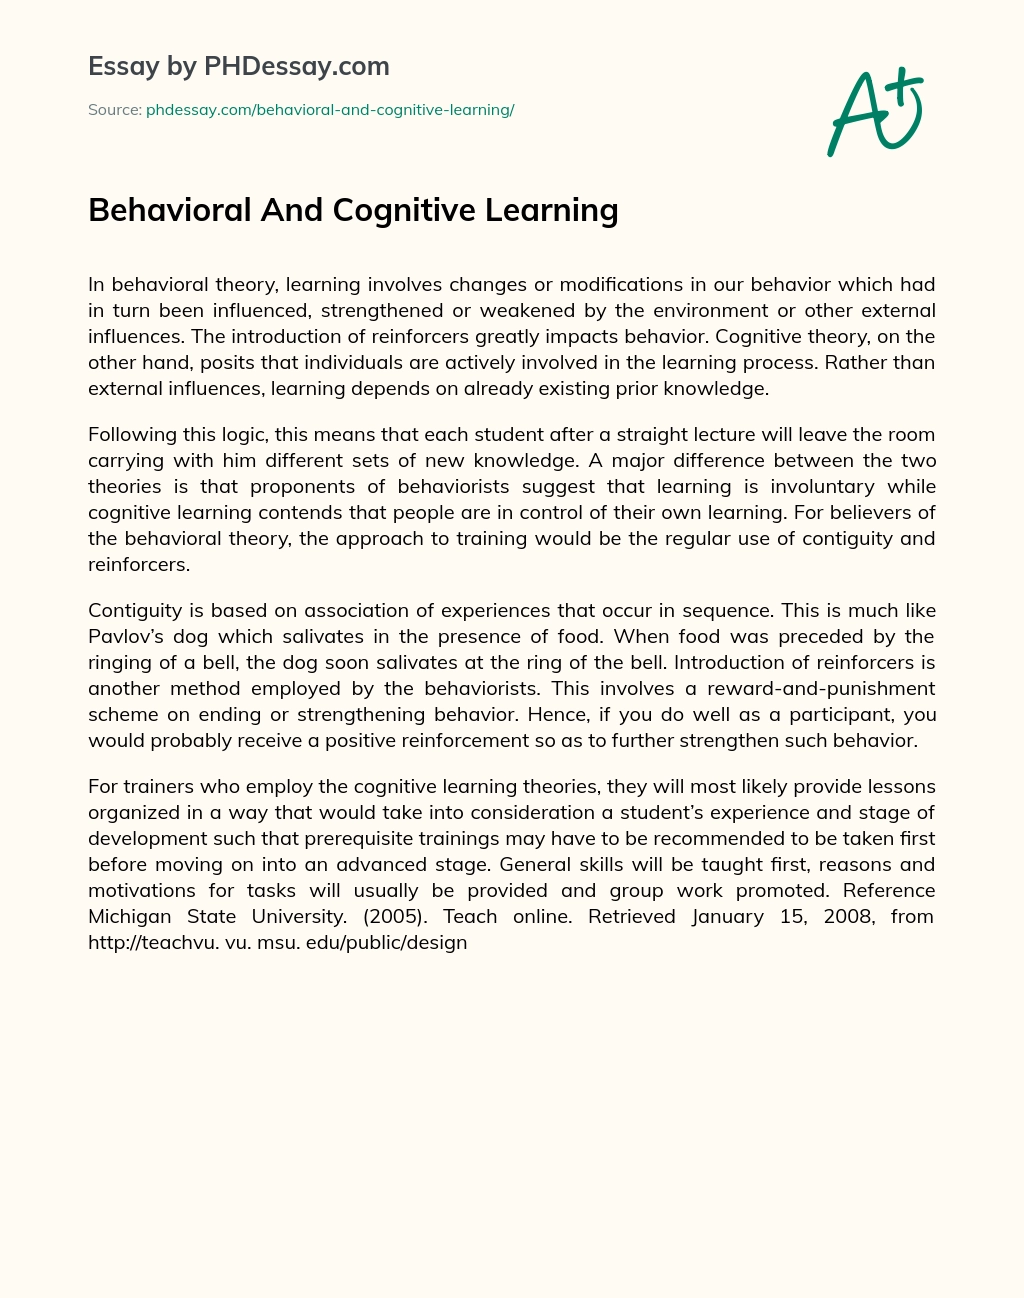 Behavioral And Cognitive Learning essay